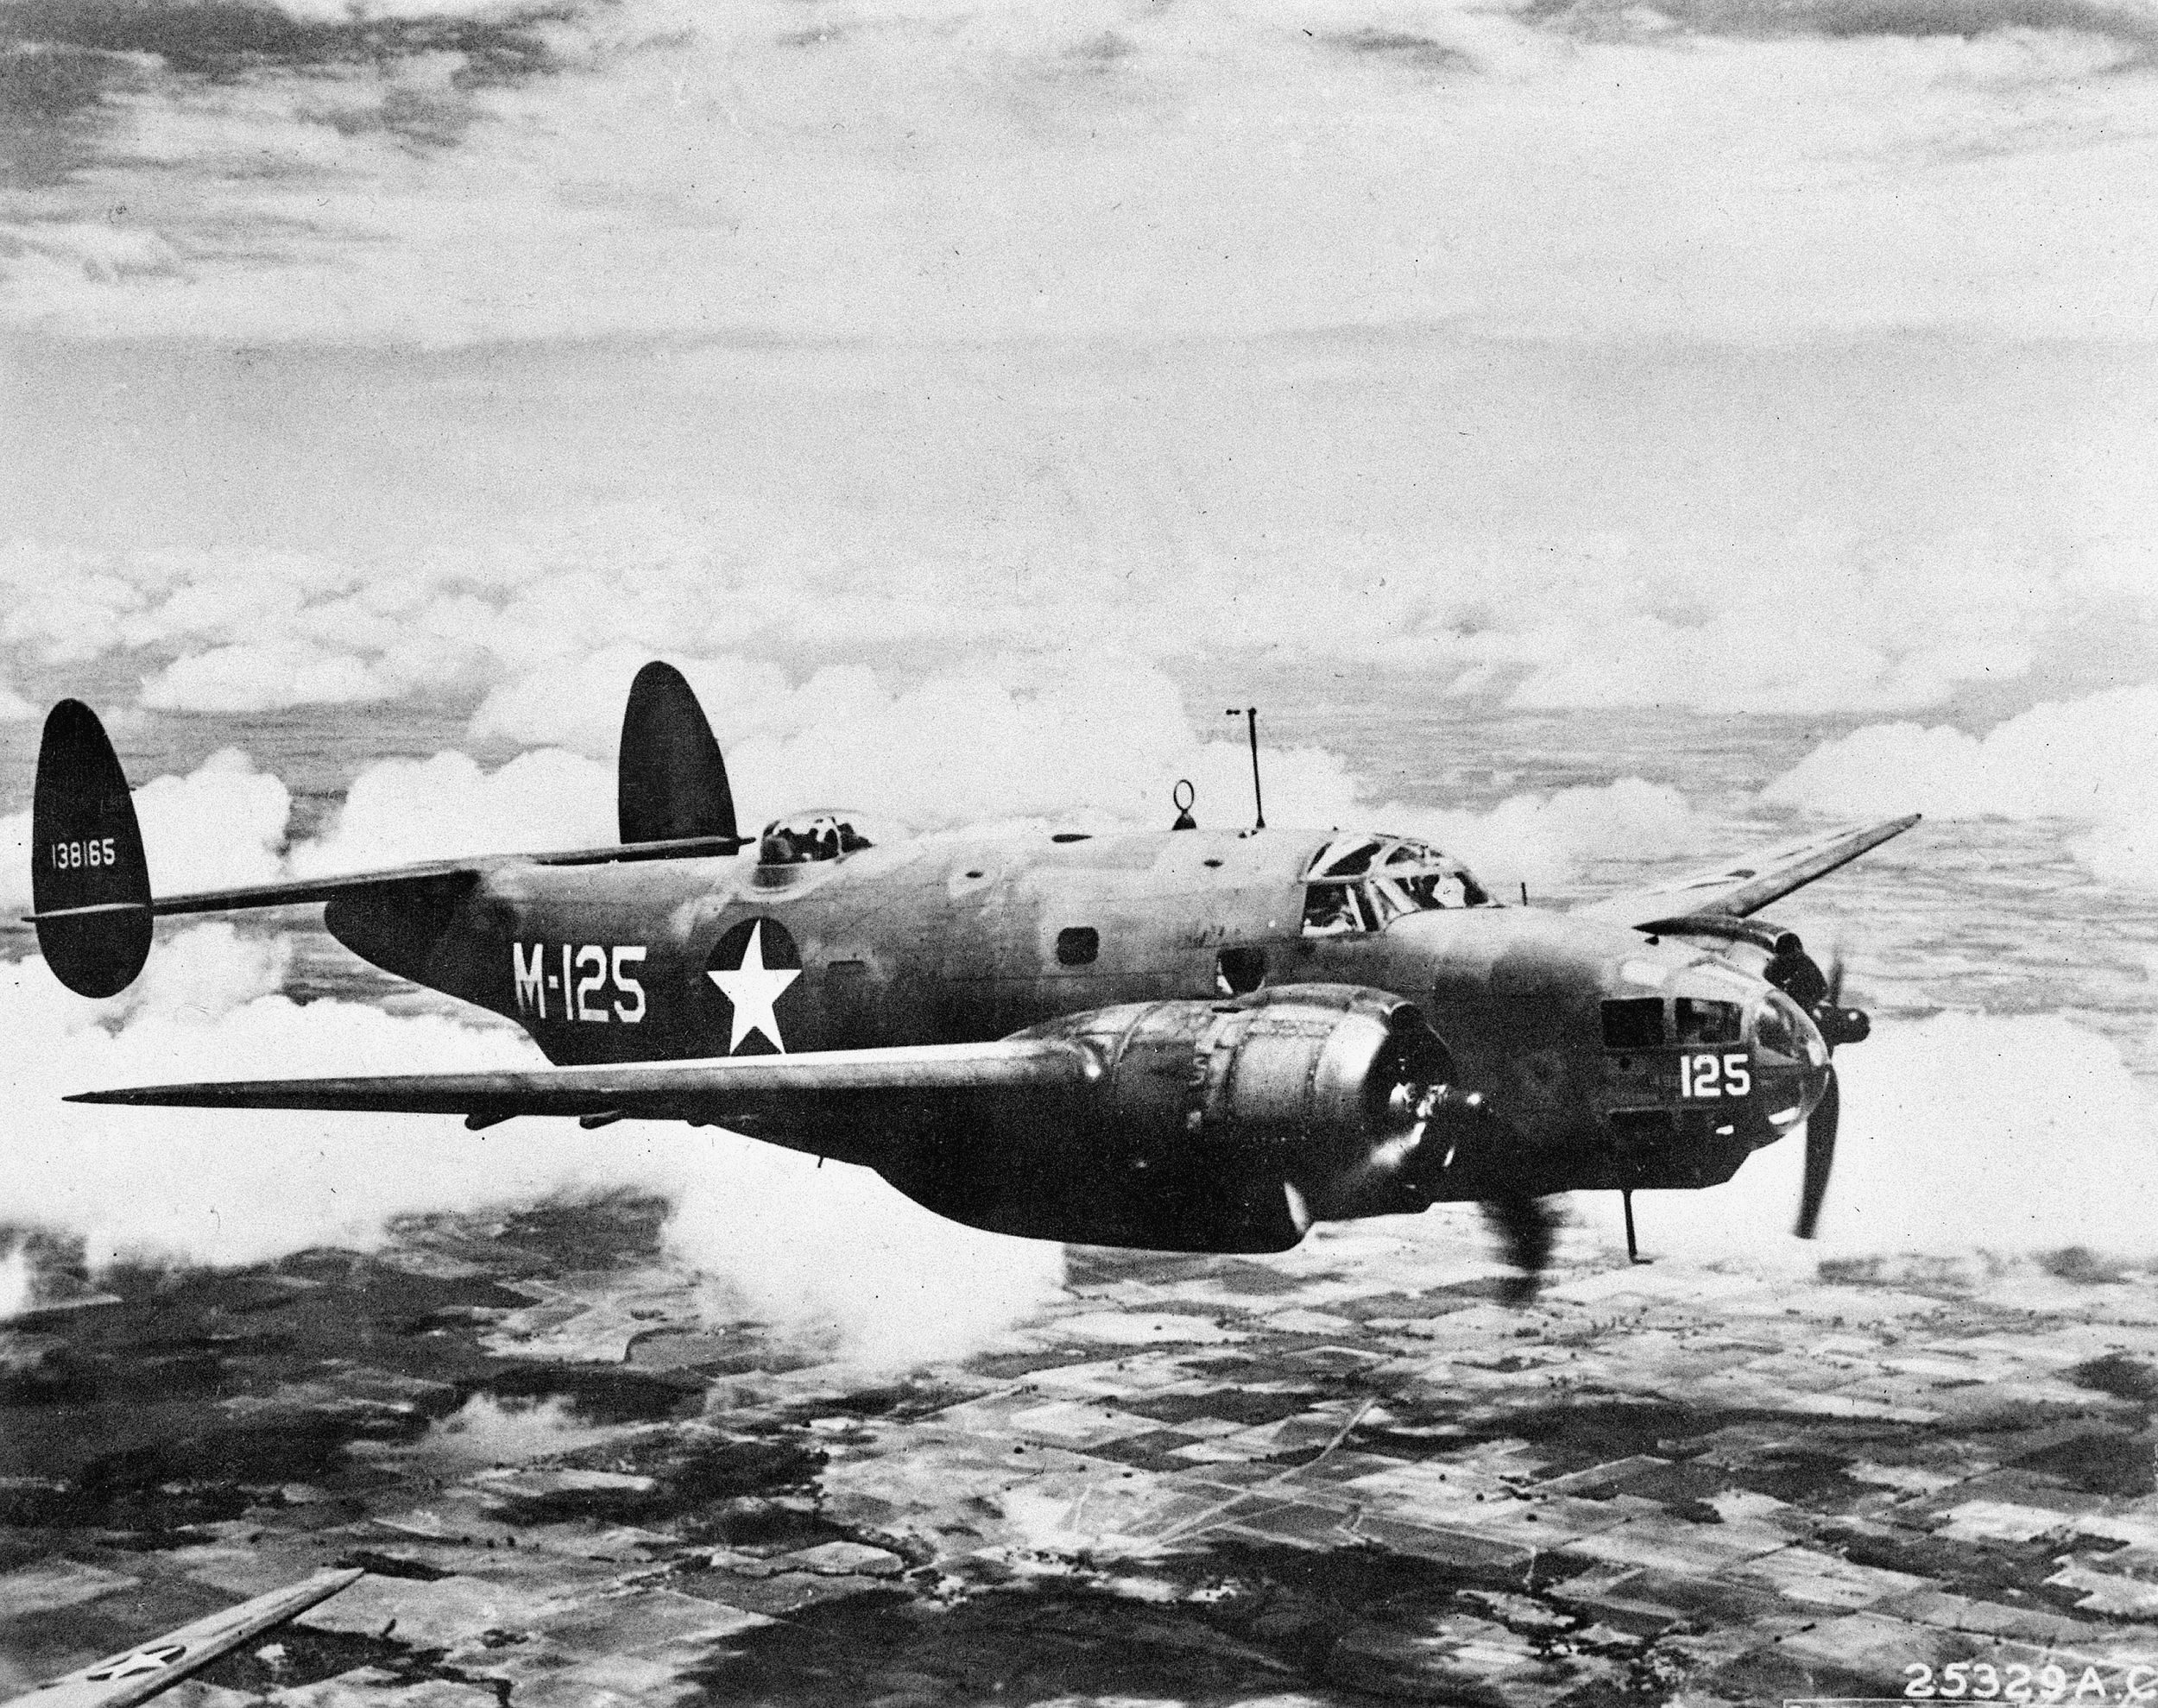 A Lockheed Ventura of the U.S. Navy flies antisubmarine patrol above the Atlantic Ocean. Squadrons of the Royal Australian Air Force flew the Ventura in both the European and Pacific Theaters.